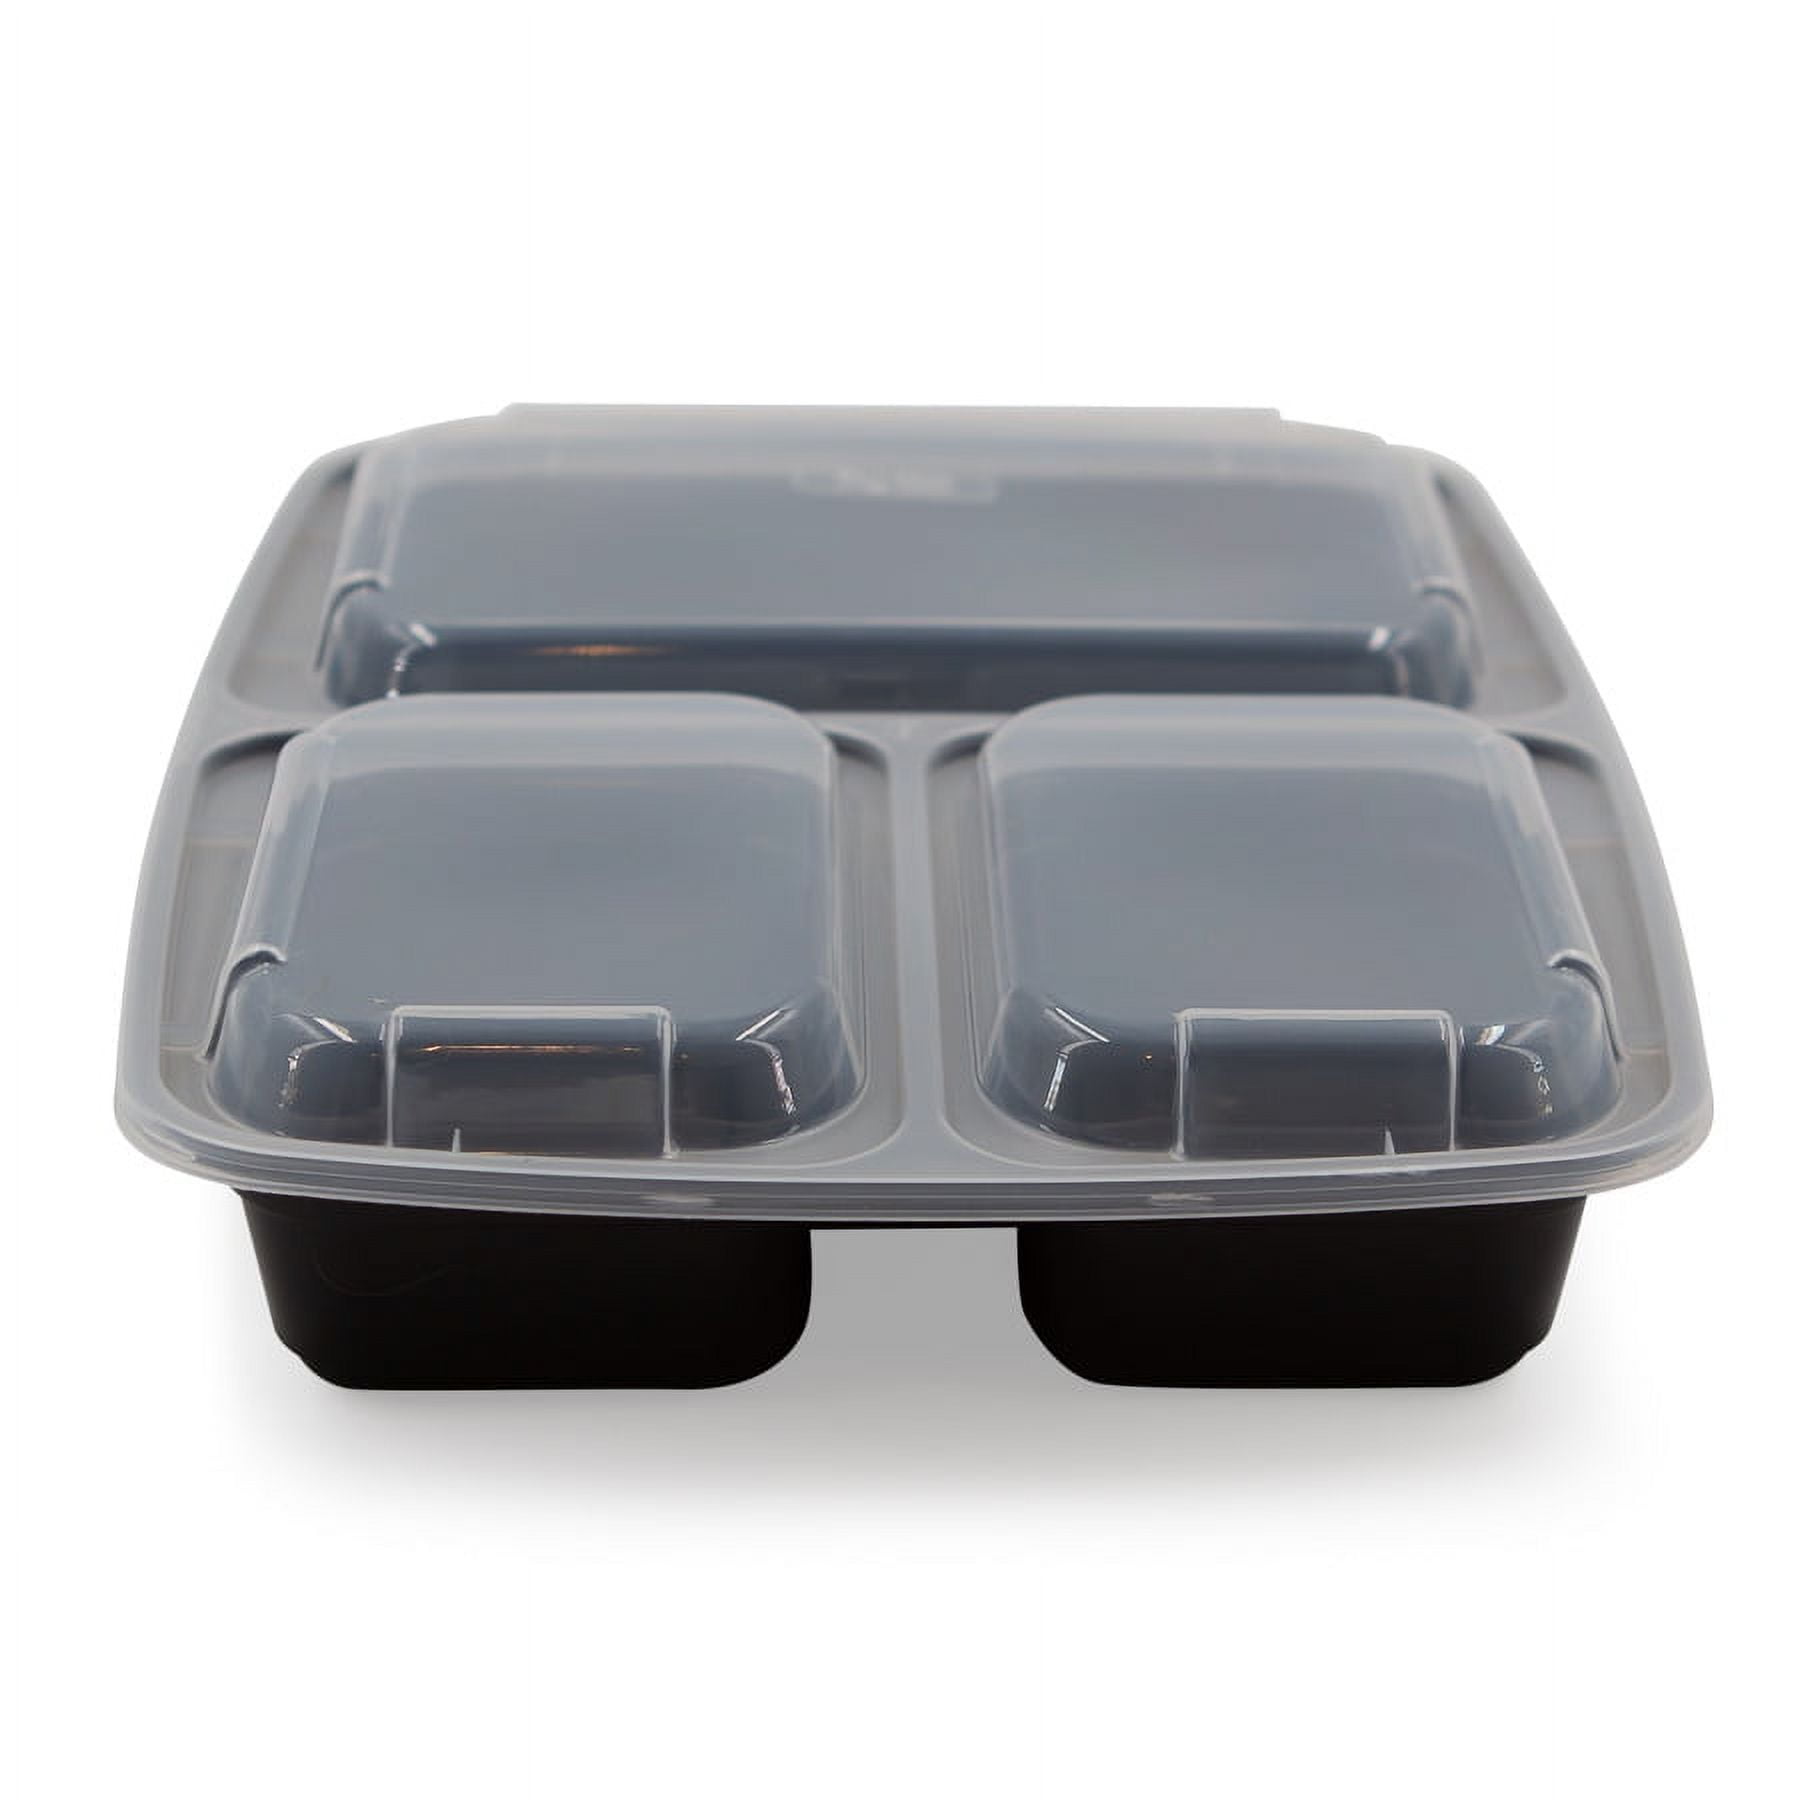 24 oz. Meal Prep Containers With Lids, 3 Compartment Lunch